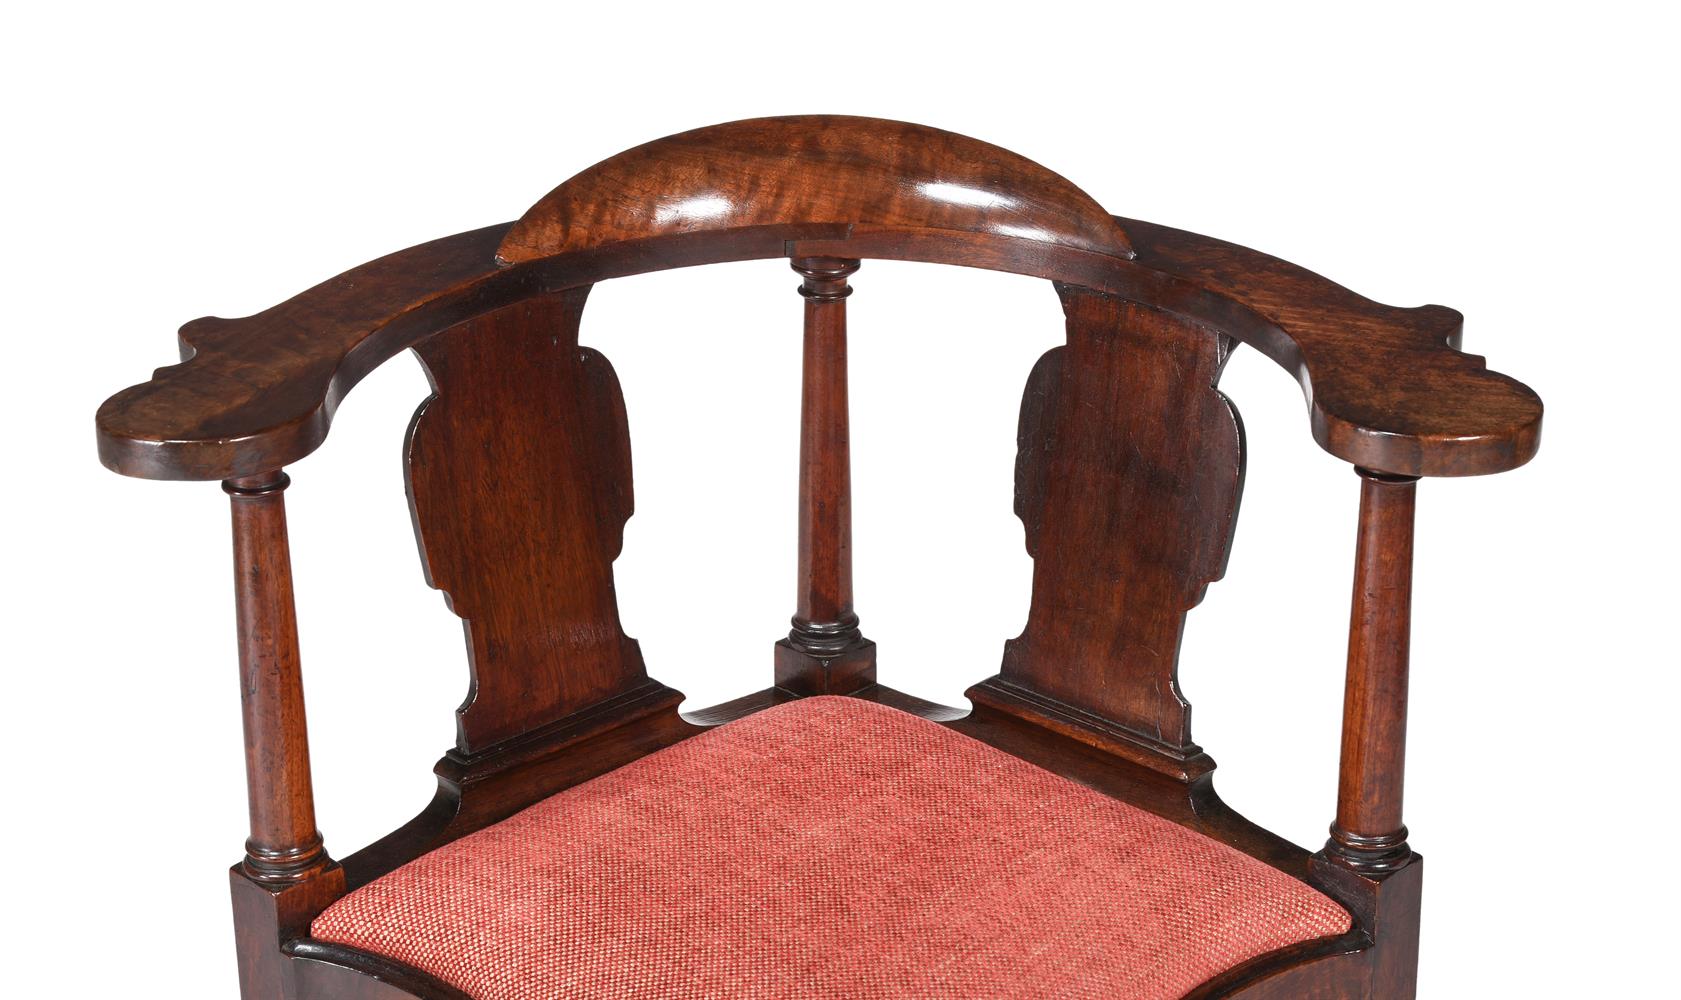 A GEORGE I WALNUT DESK OR READING CHAIR, CIRCA 1720 - Image 2 of 4